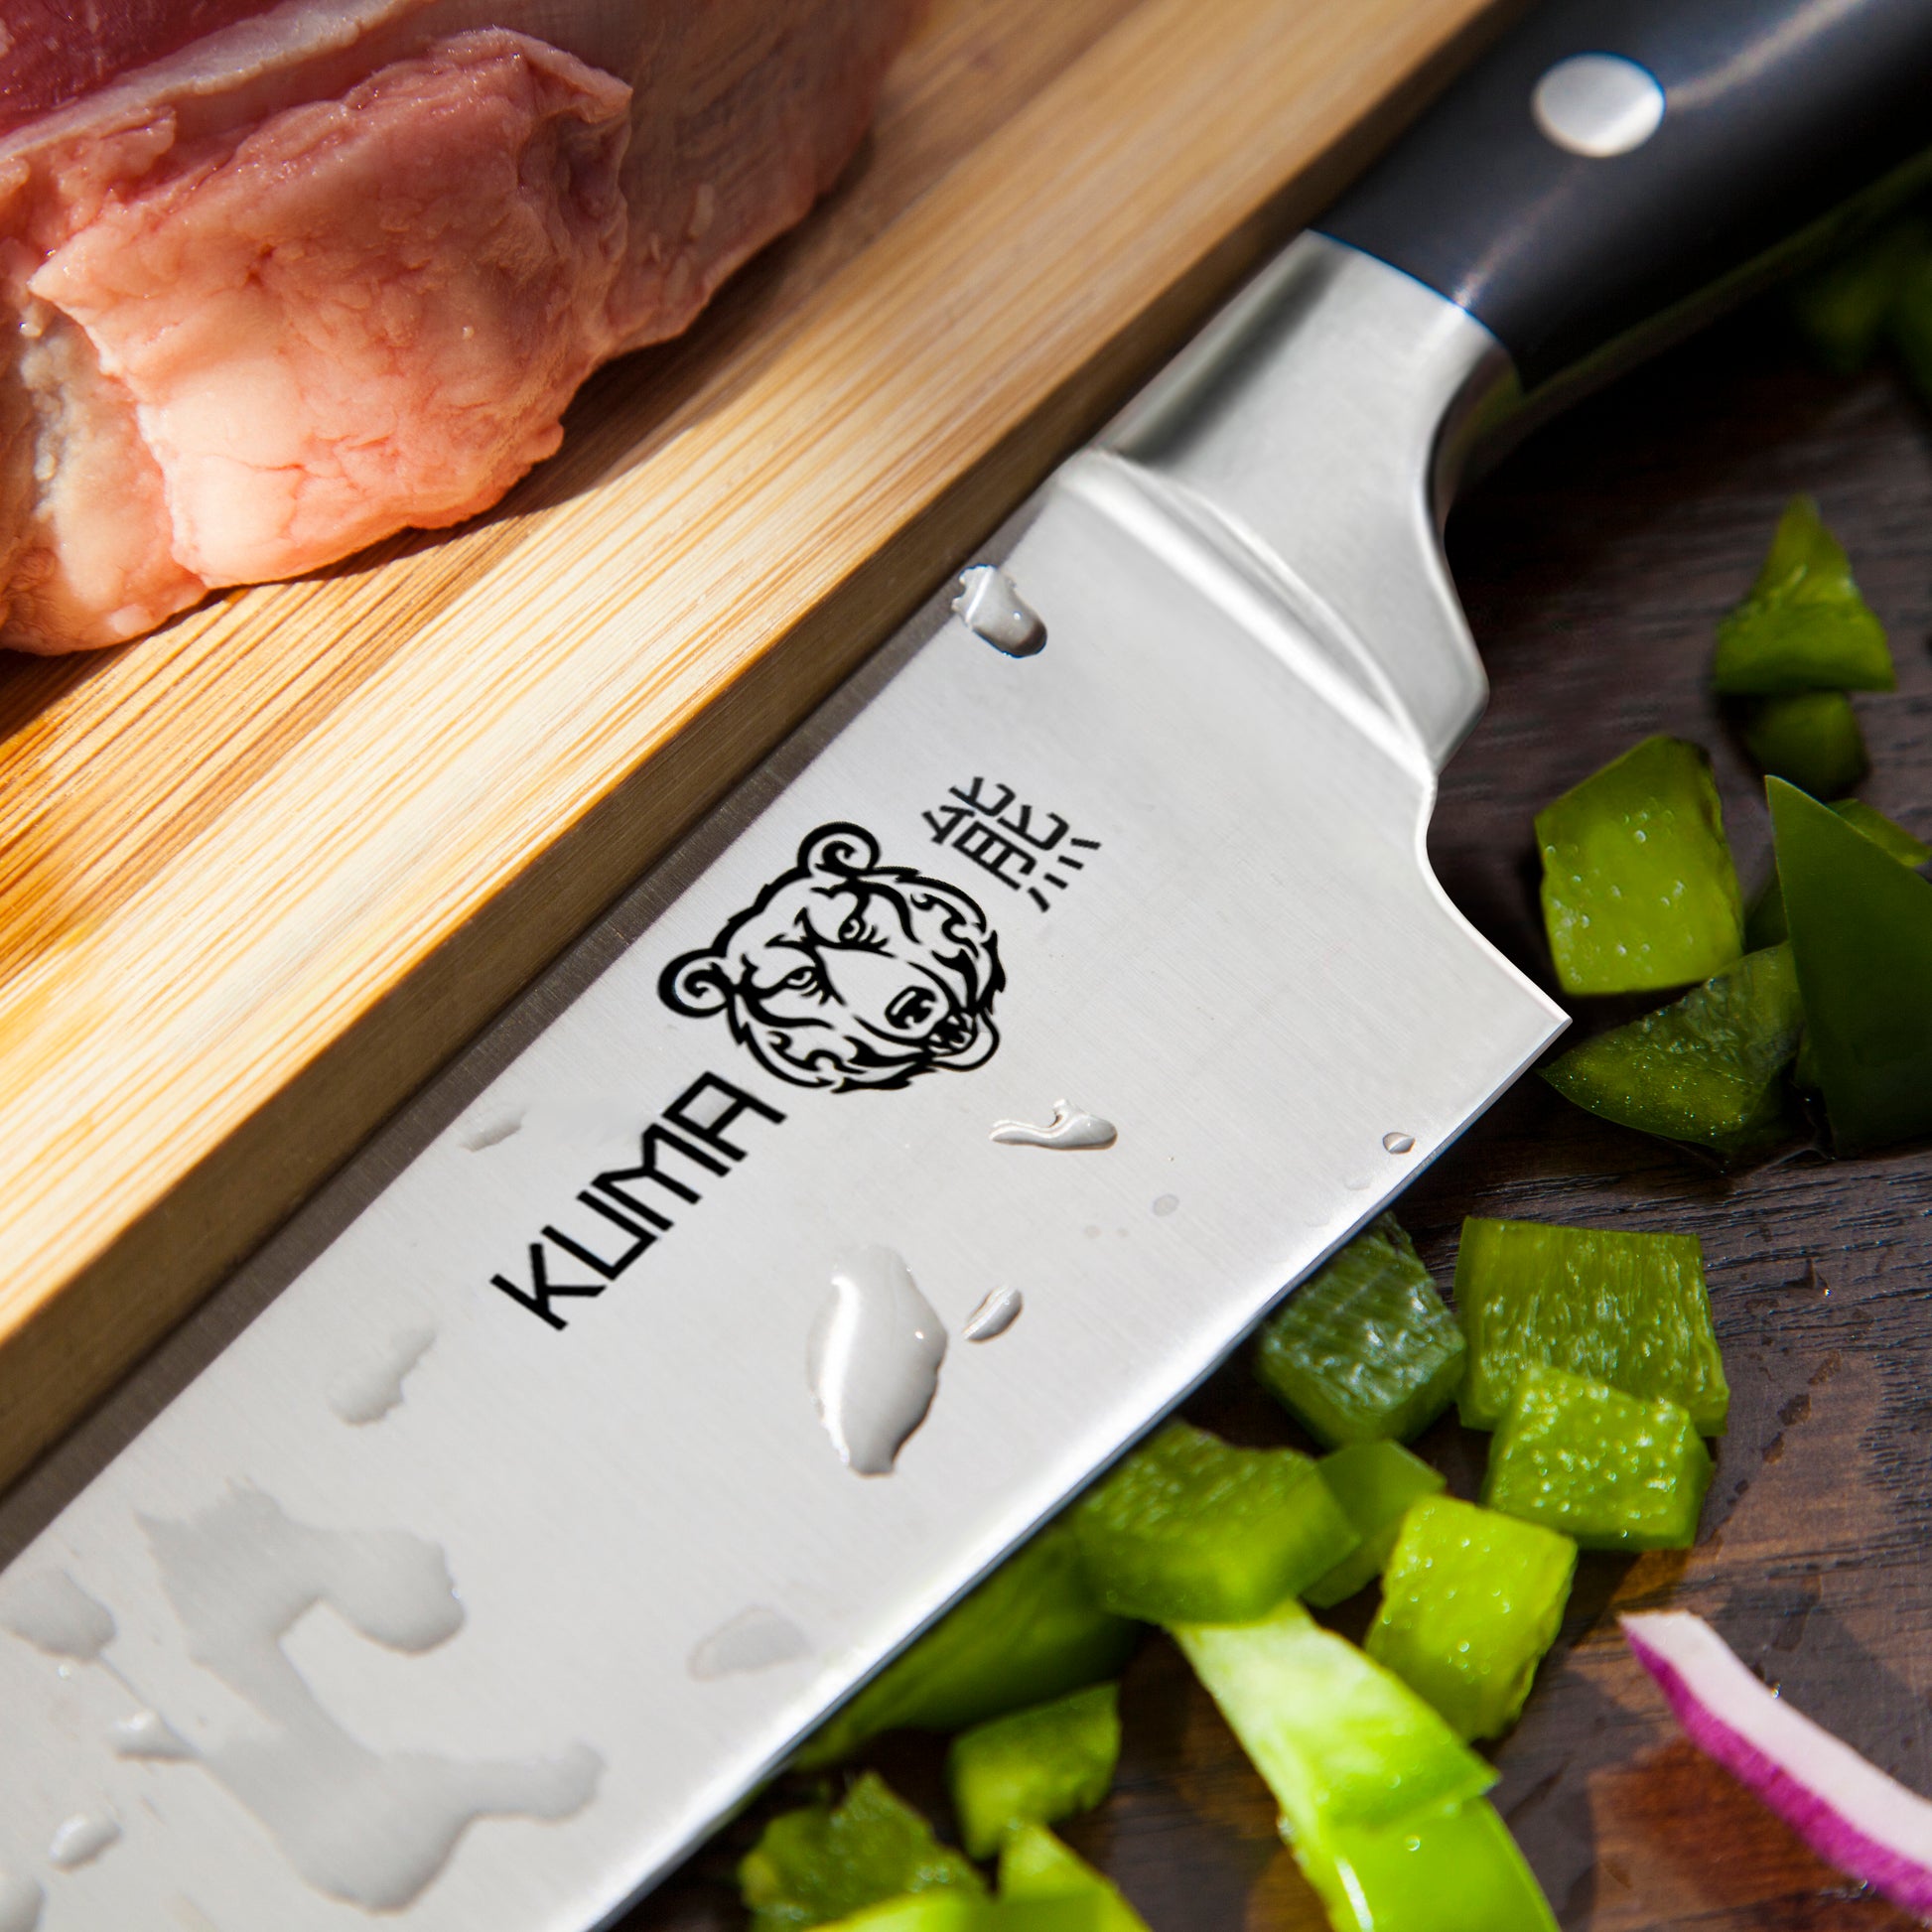 Professional 12 Meat Cutting Knife - the Ultimate 100% Steel Slicing Knife  - Slice Meat Like the Pros